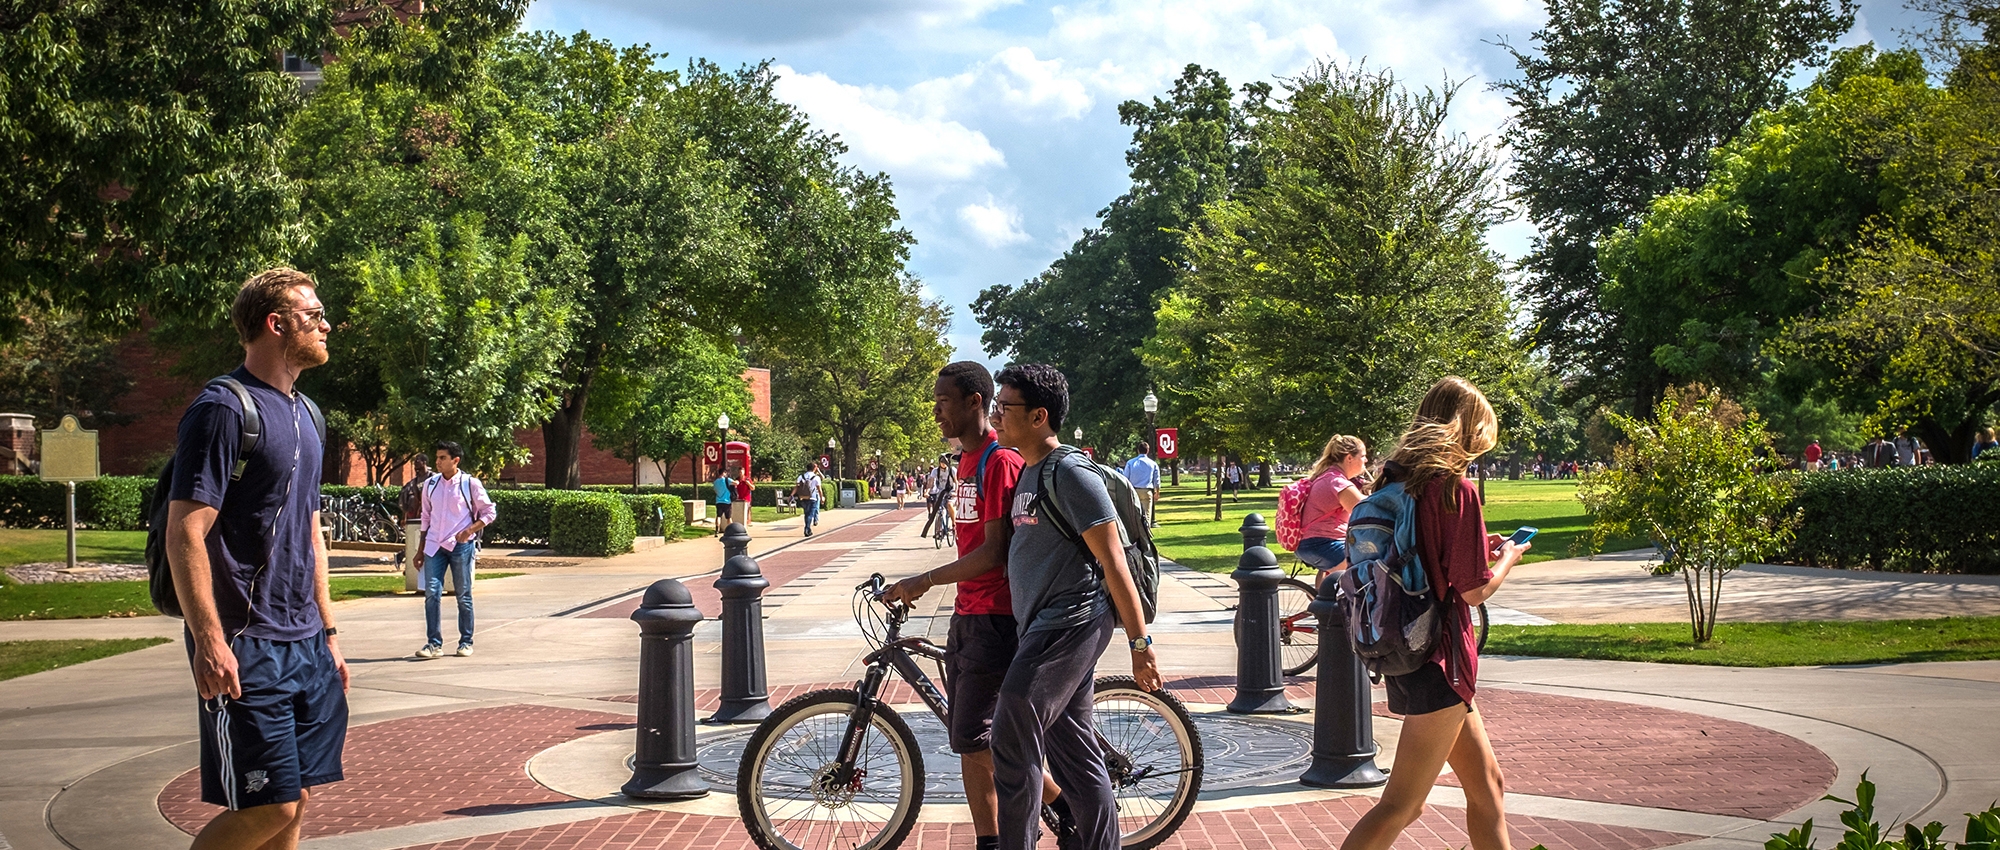 Students walking and biking on the University of Oklahoma Norman campus.